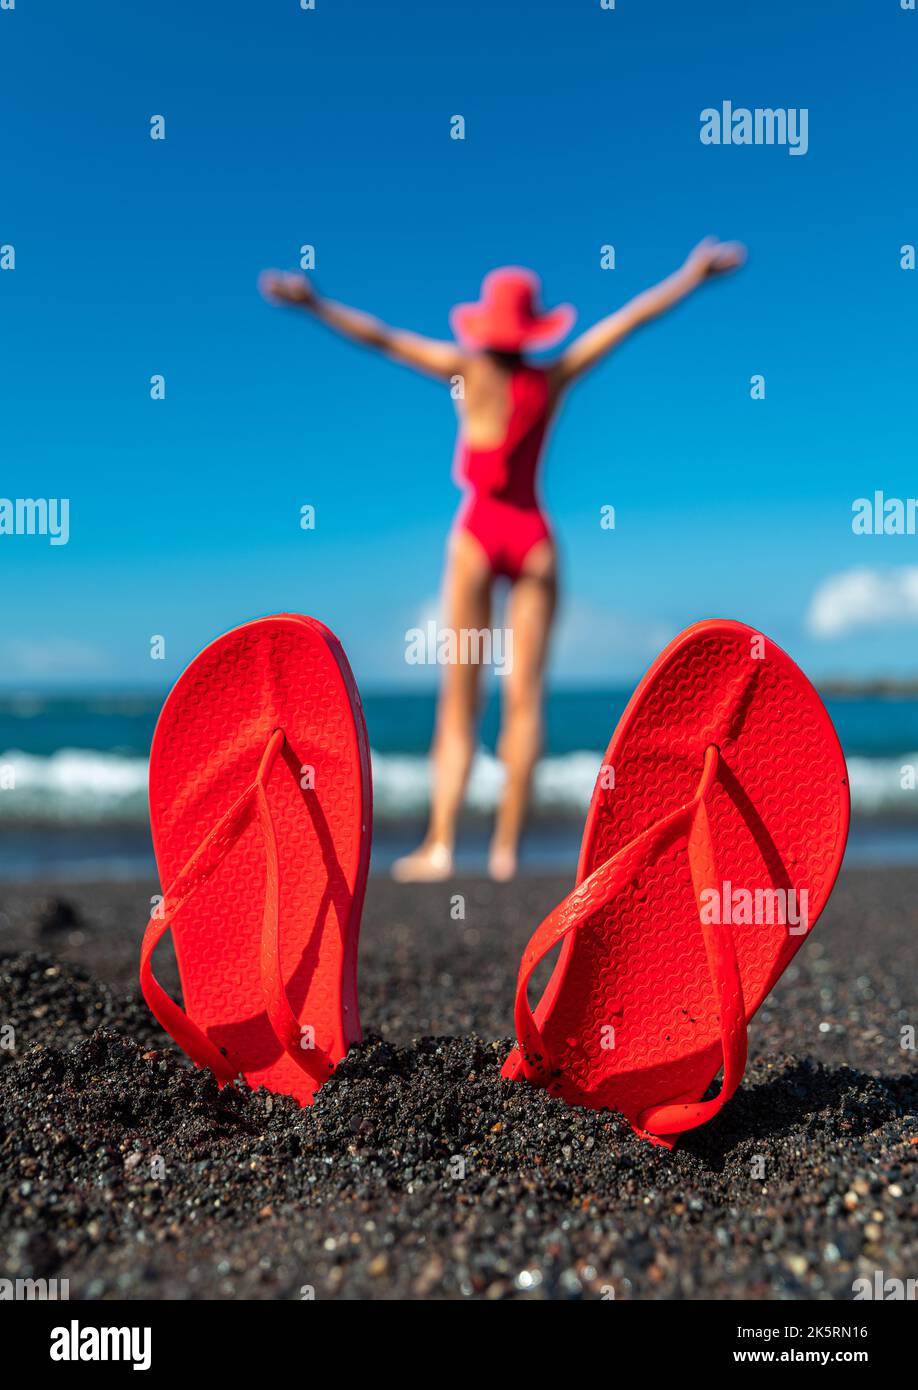 Red flip flops in the black sand and silhouette of woman in red swimsuit standing on the ocean beach. Summer concept. Stock Photo